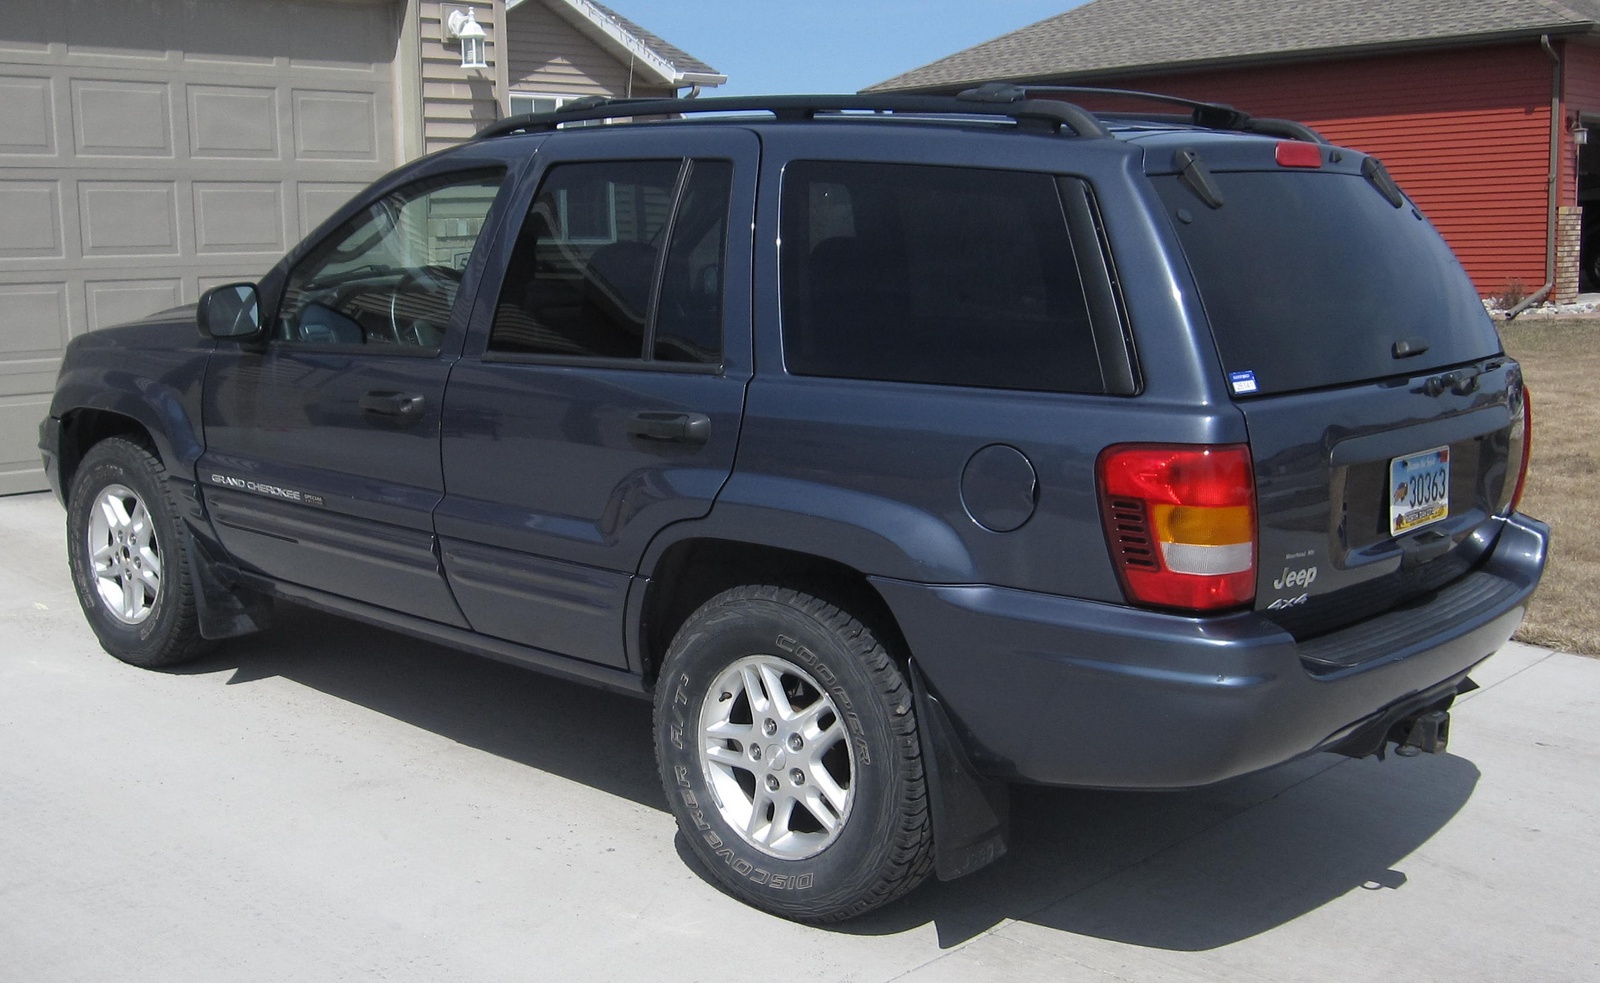 1995 Jeep grand cherokee special edition #4